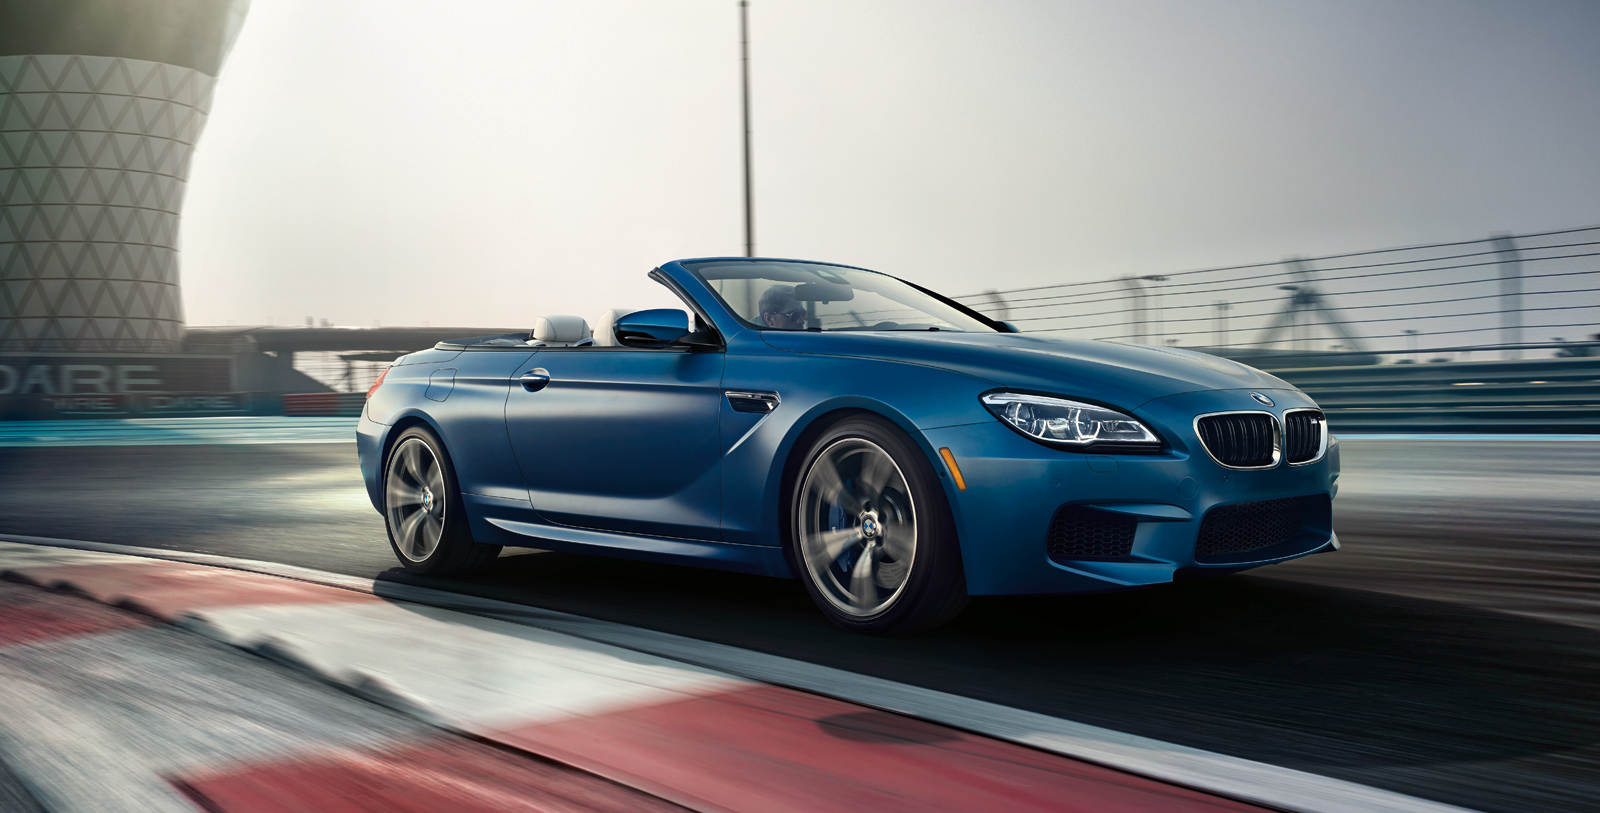 HQ BMW M6 Convertible Wallpapers | File 443.91Kb